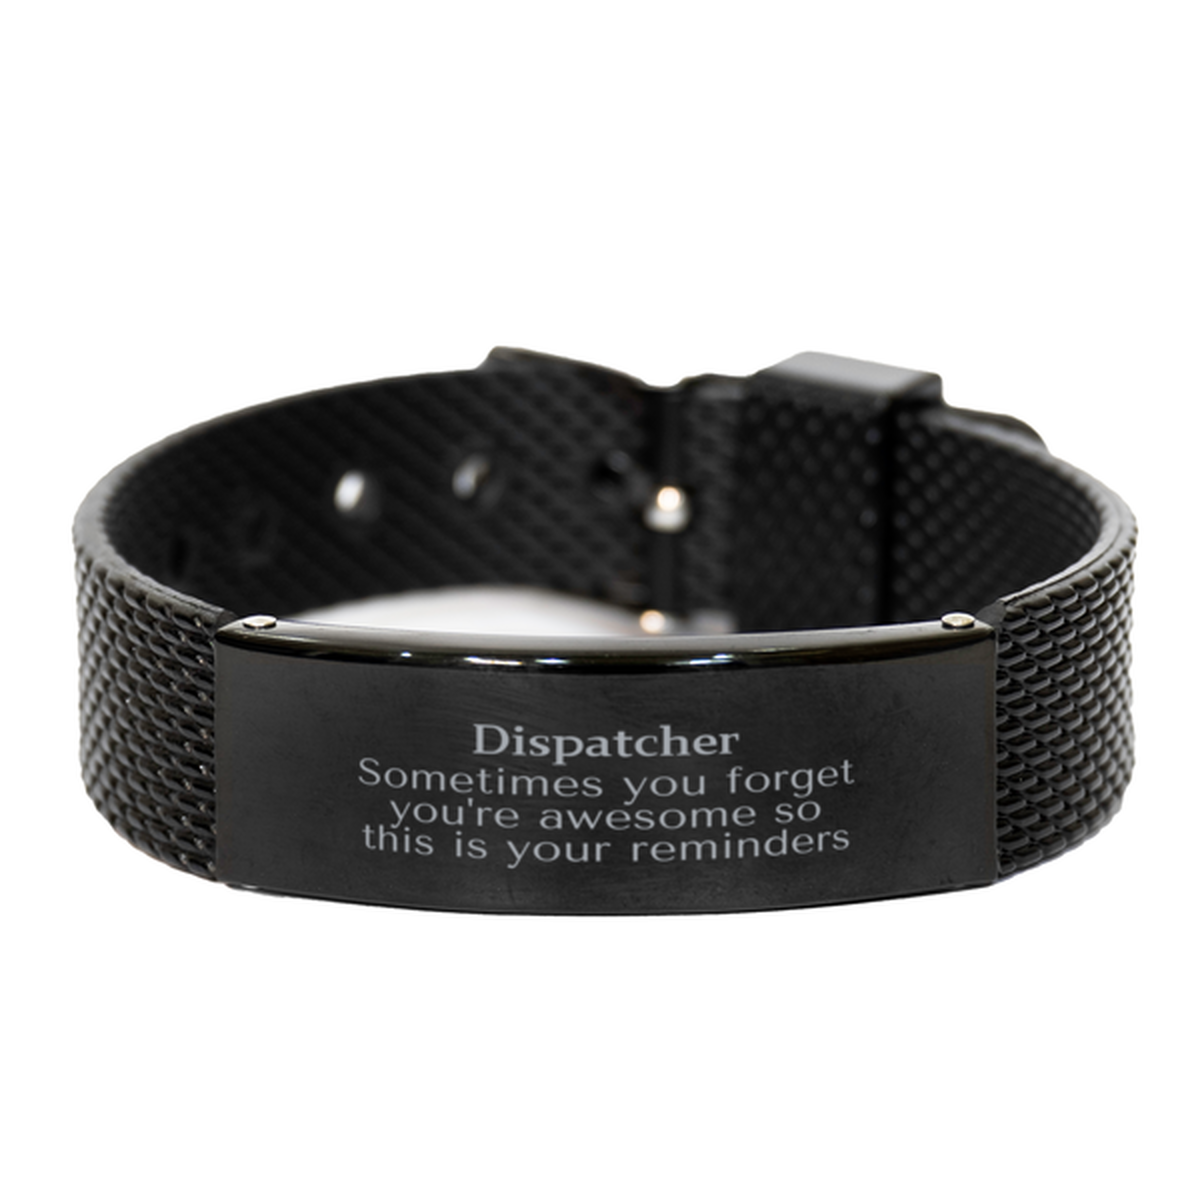 Sentimental Dispatcher Black Shark Mesh Bracelet, Dispatcher Sometimes you forget you're awesome so this is your reminders, Graduation Christmas Birthday Gifts for Dispatcher, Men, Women, Coworkers